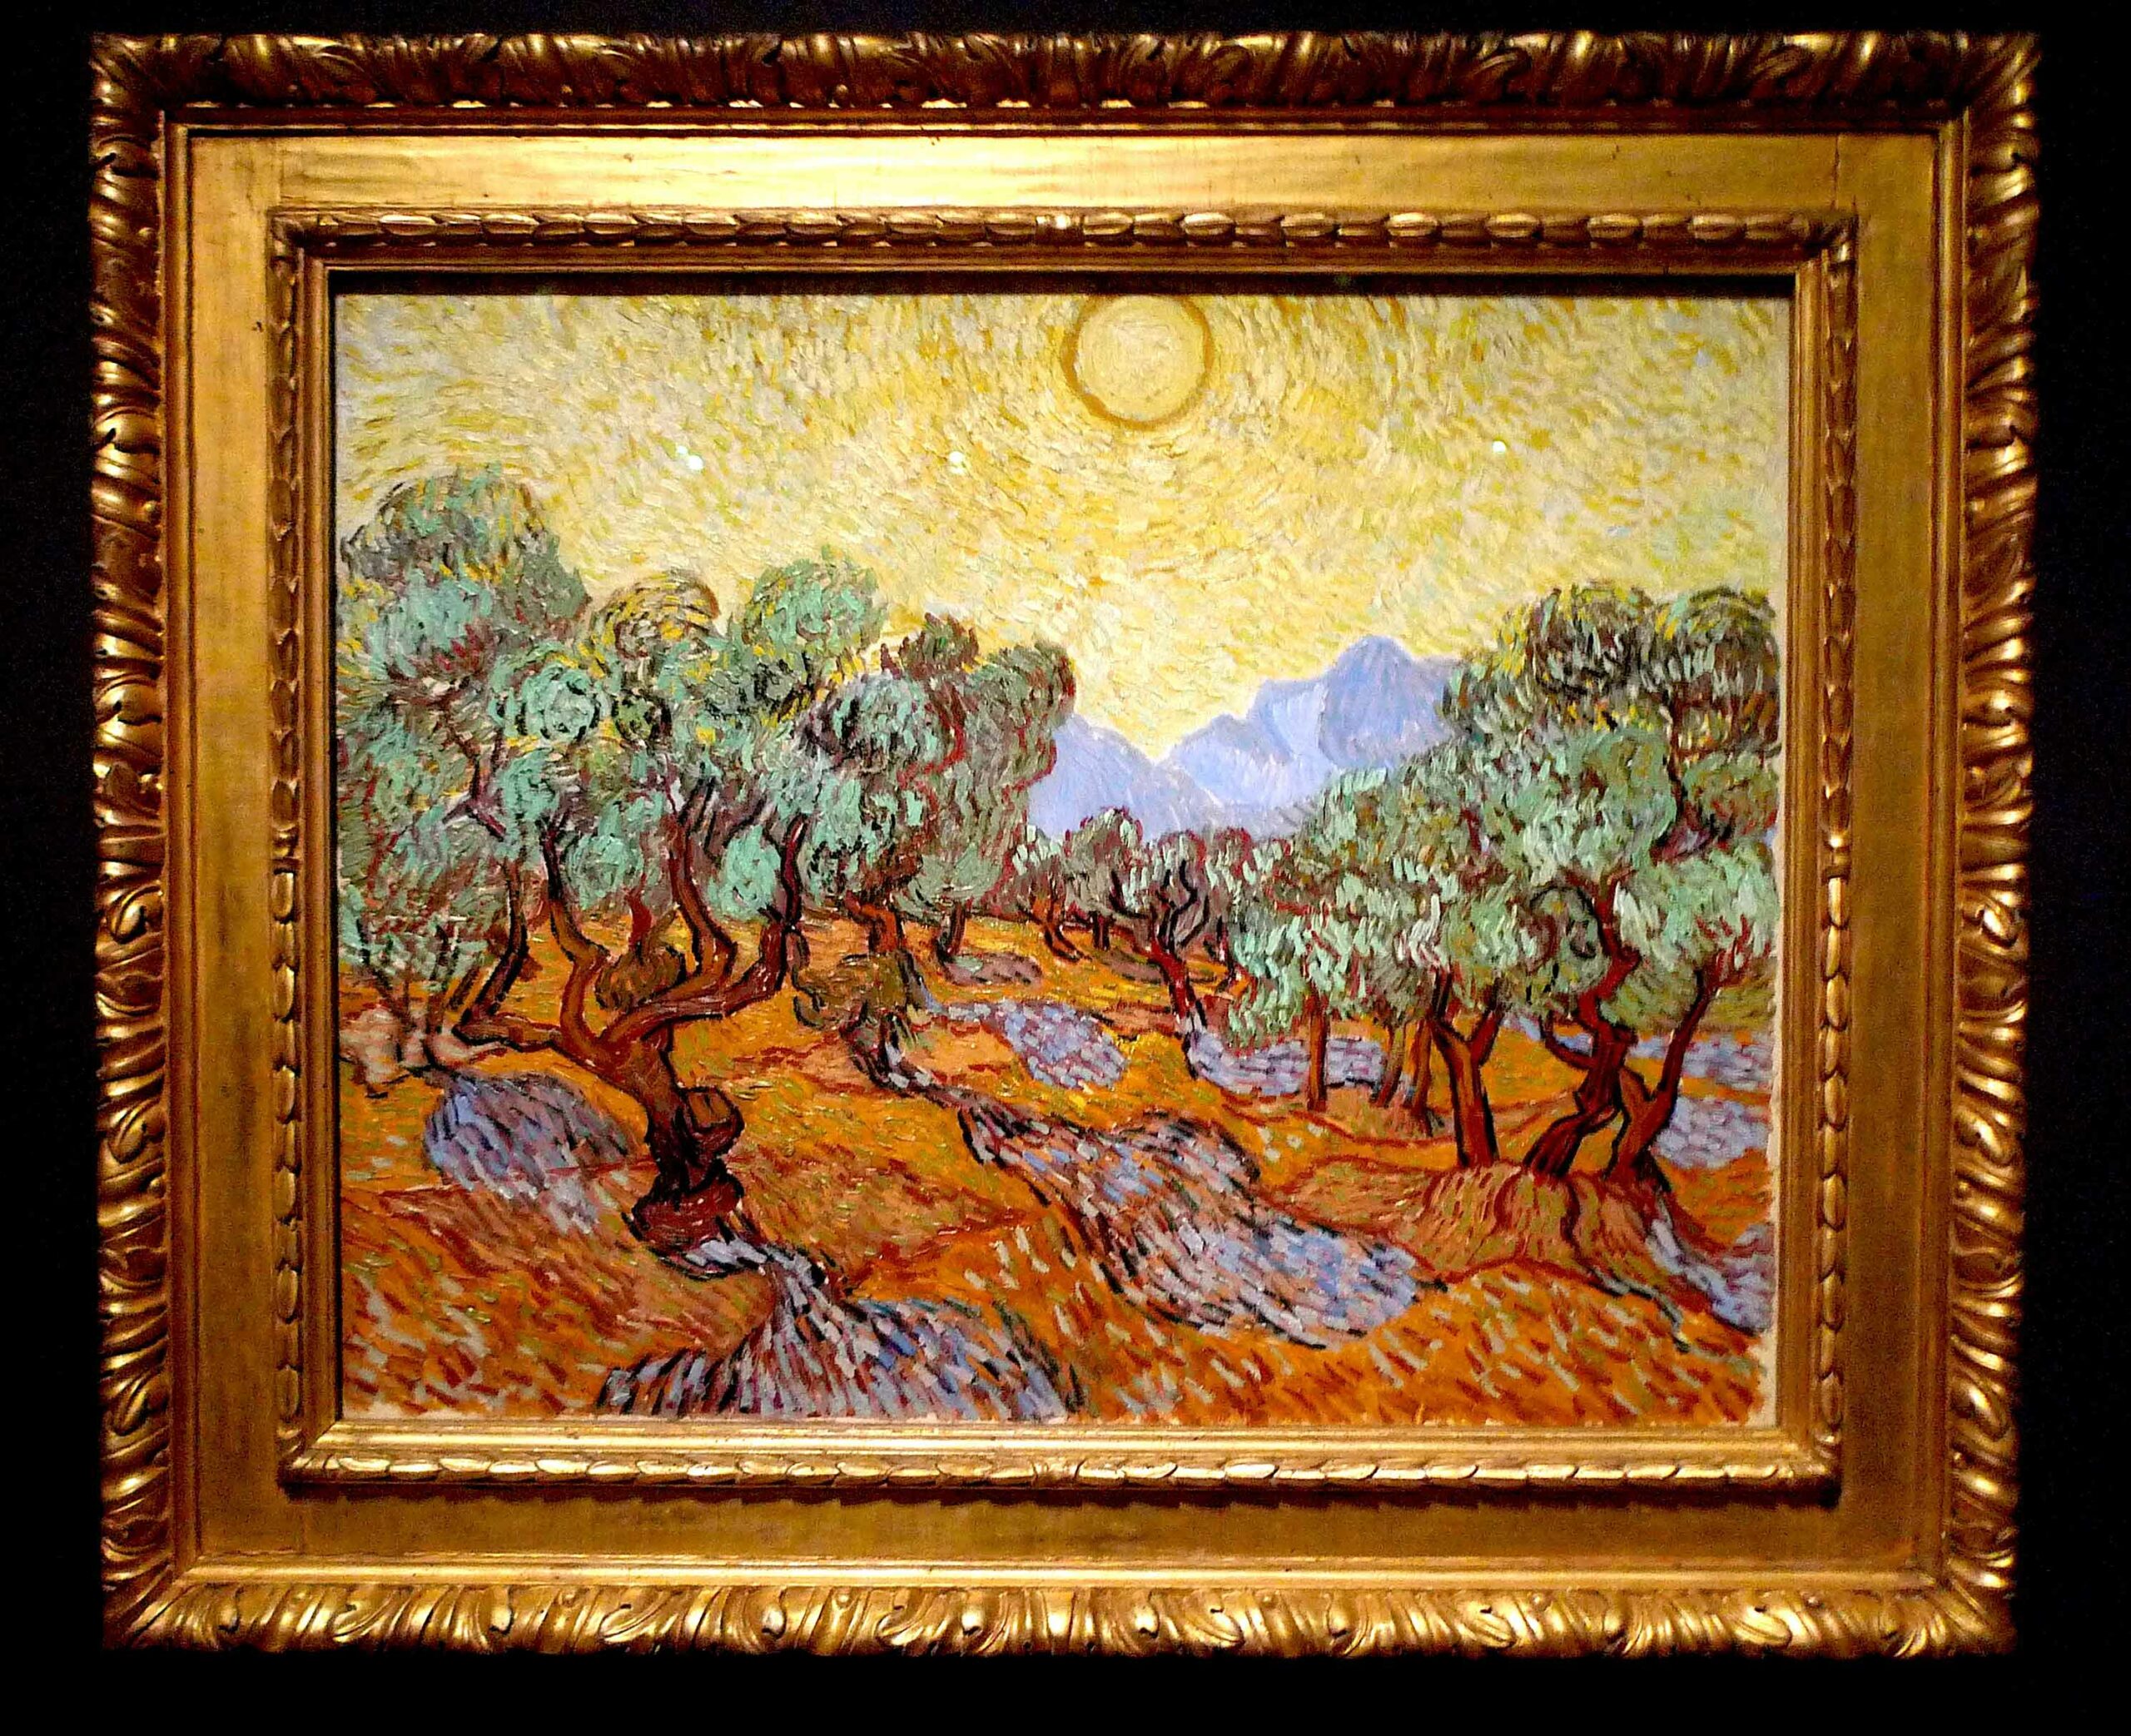 Van Gogh's Symbolic Olive Trees and Landscapes at the Dallas Museum of Art